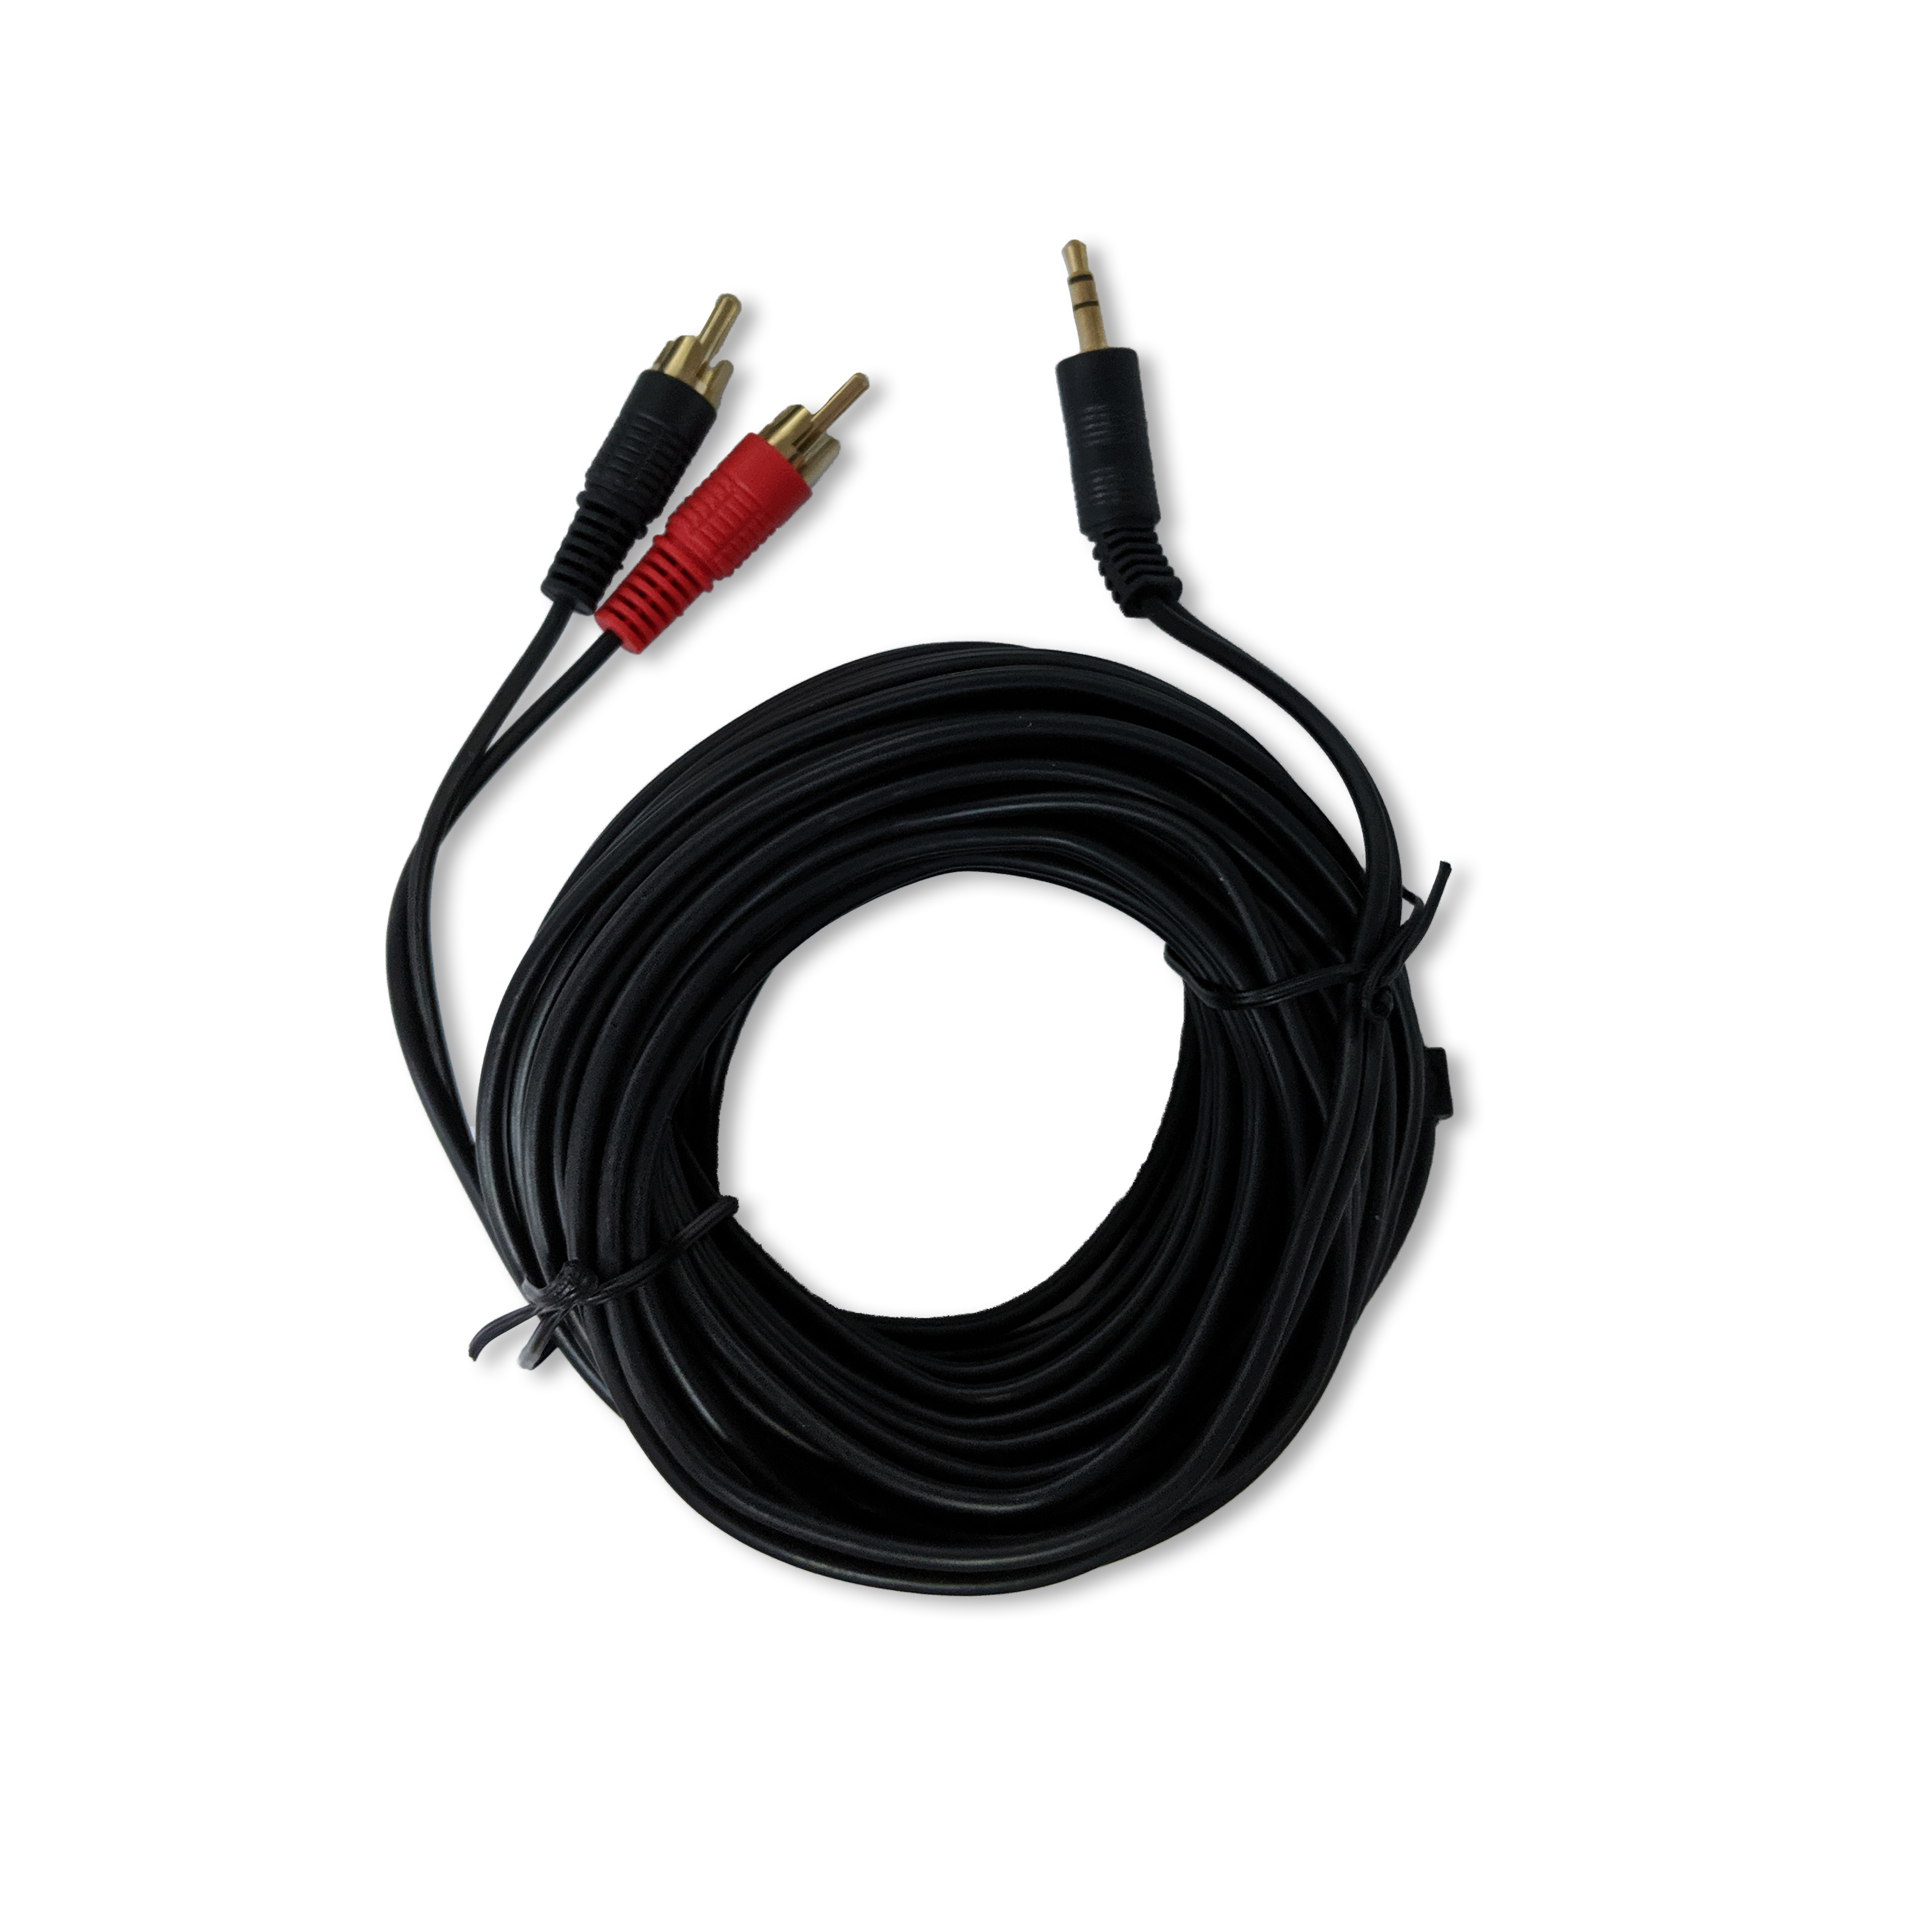 01255, phono to 3.5mm jack cable 10m, black